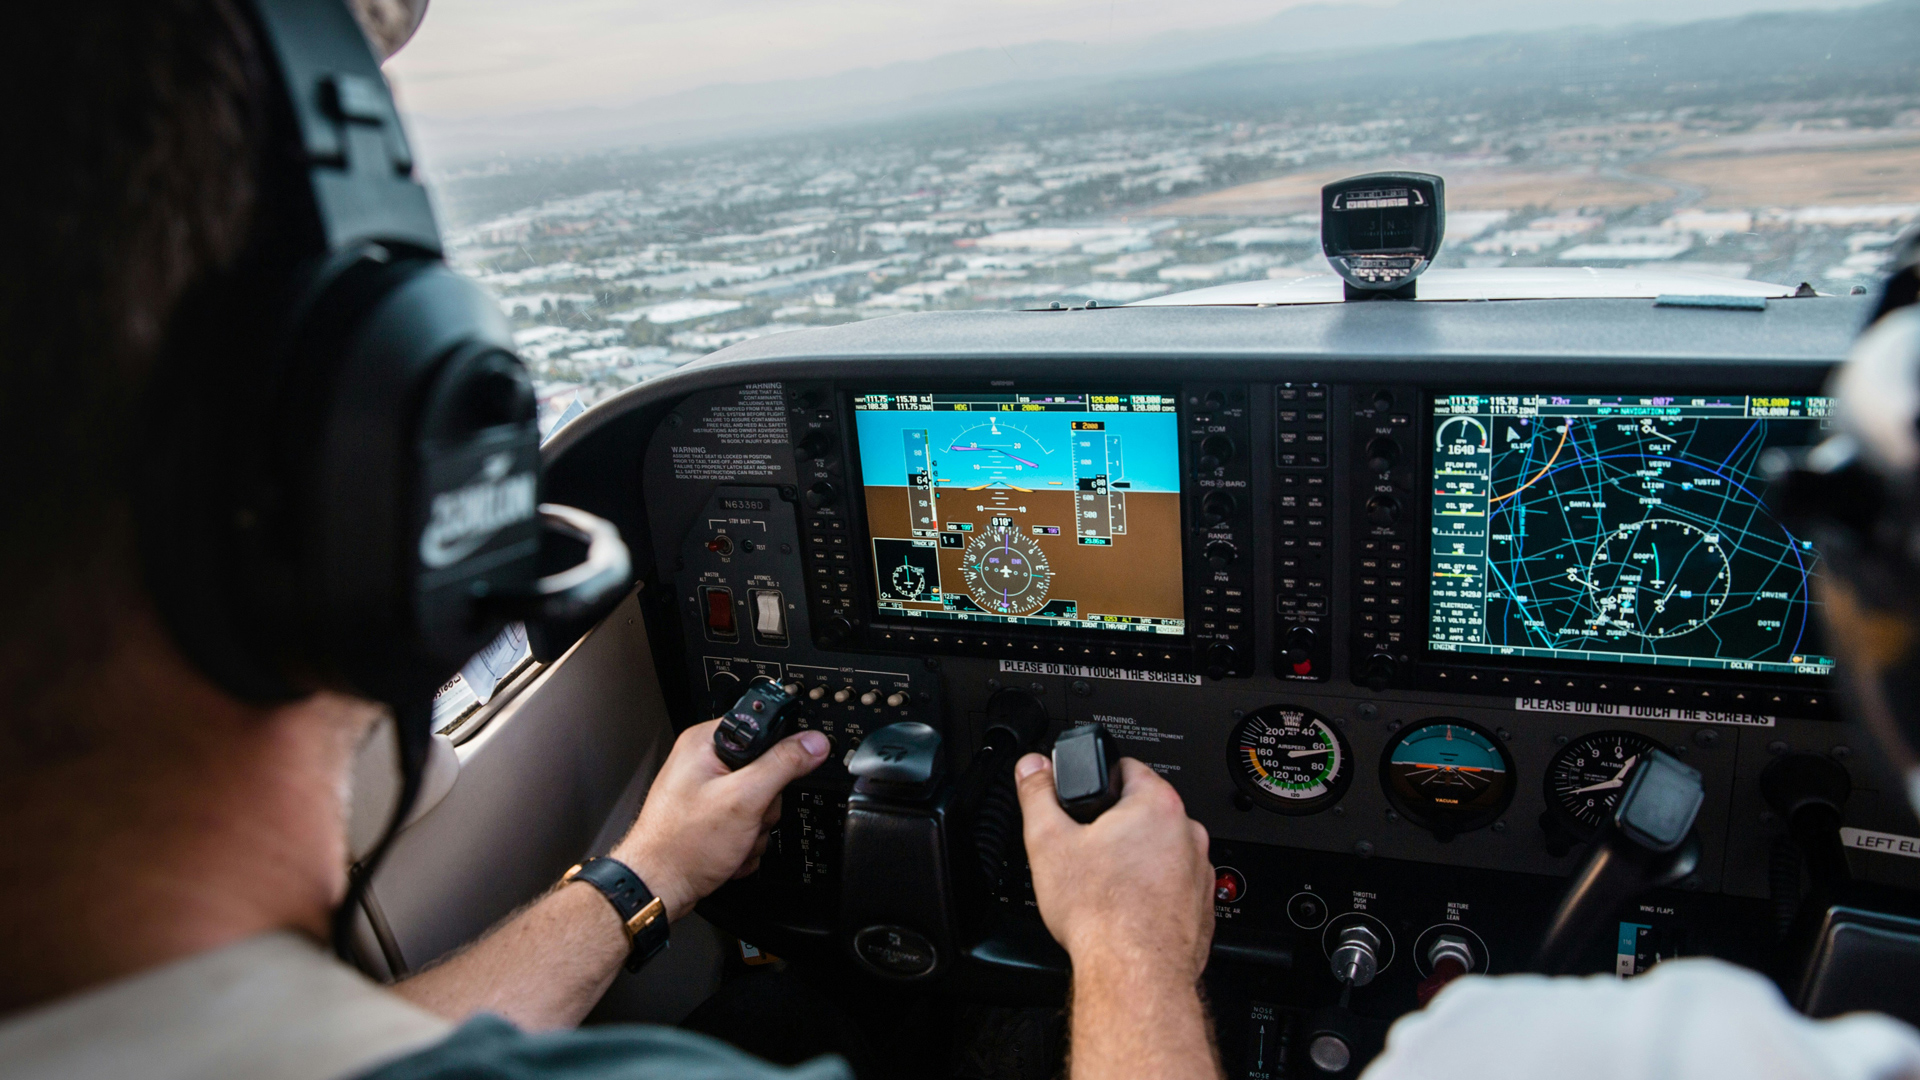 A view of a cockpit showing the pilot flying the plane over a city.